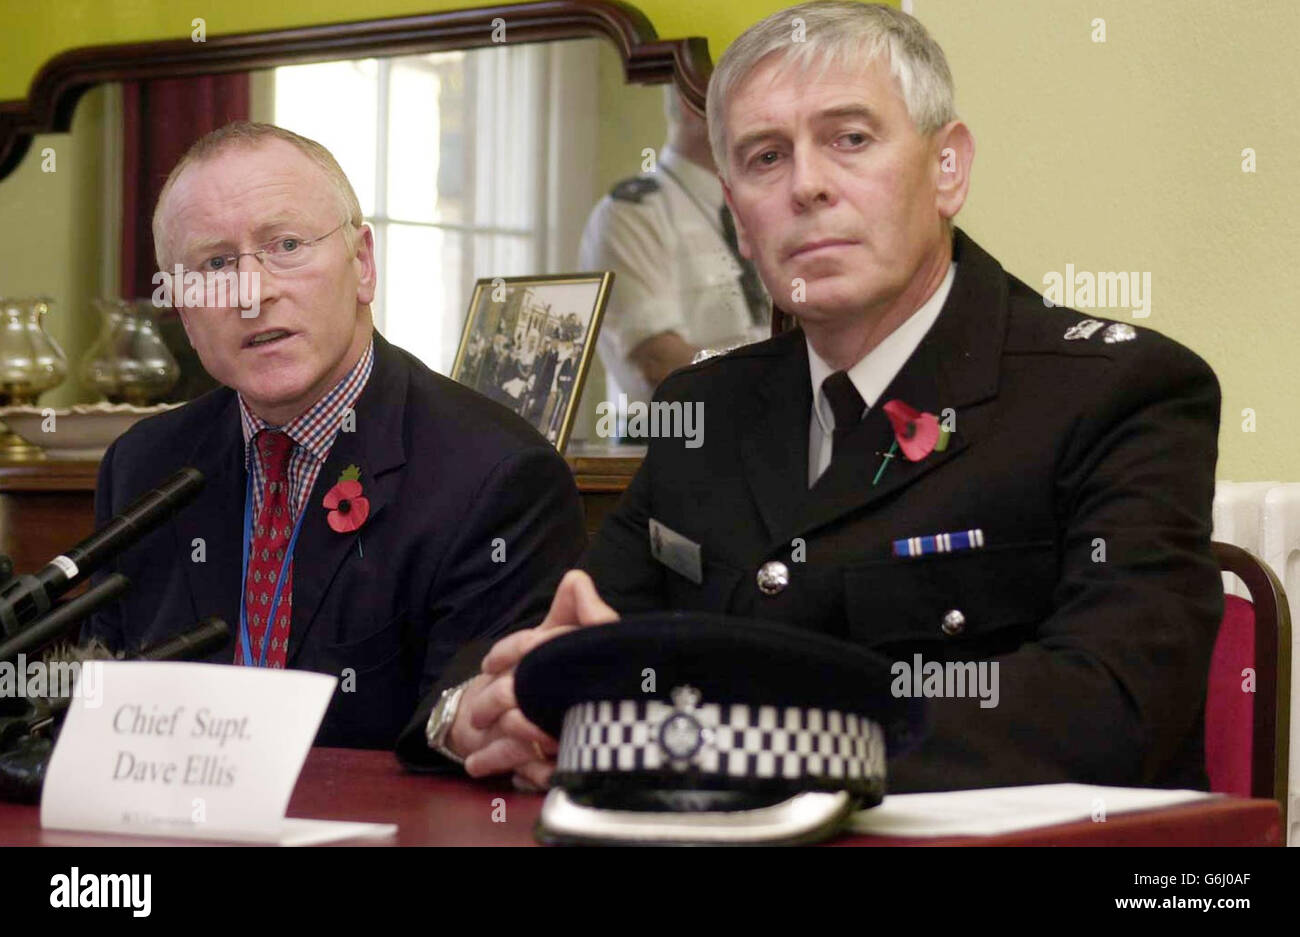 Detective Superintendent Stuart Newberry (left) and Chief Superintendent Dave Ellis attend a press conference in Bodmin Cornwall, after the bodies of a husband and wife were found last night near Wadebridge. A double murder investigation was launched after Carol, 53, and Graham Fisher, 60, were shot dead at close range at their isolated country home in Wadebridge, police said, with a number of shots having been fired in the bungalow. Stock Photo